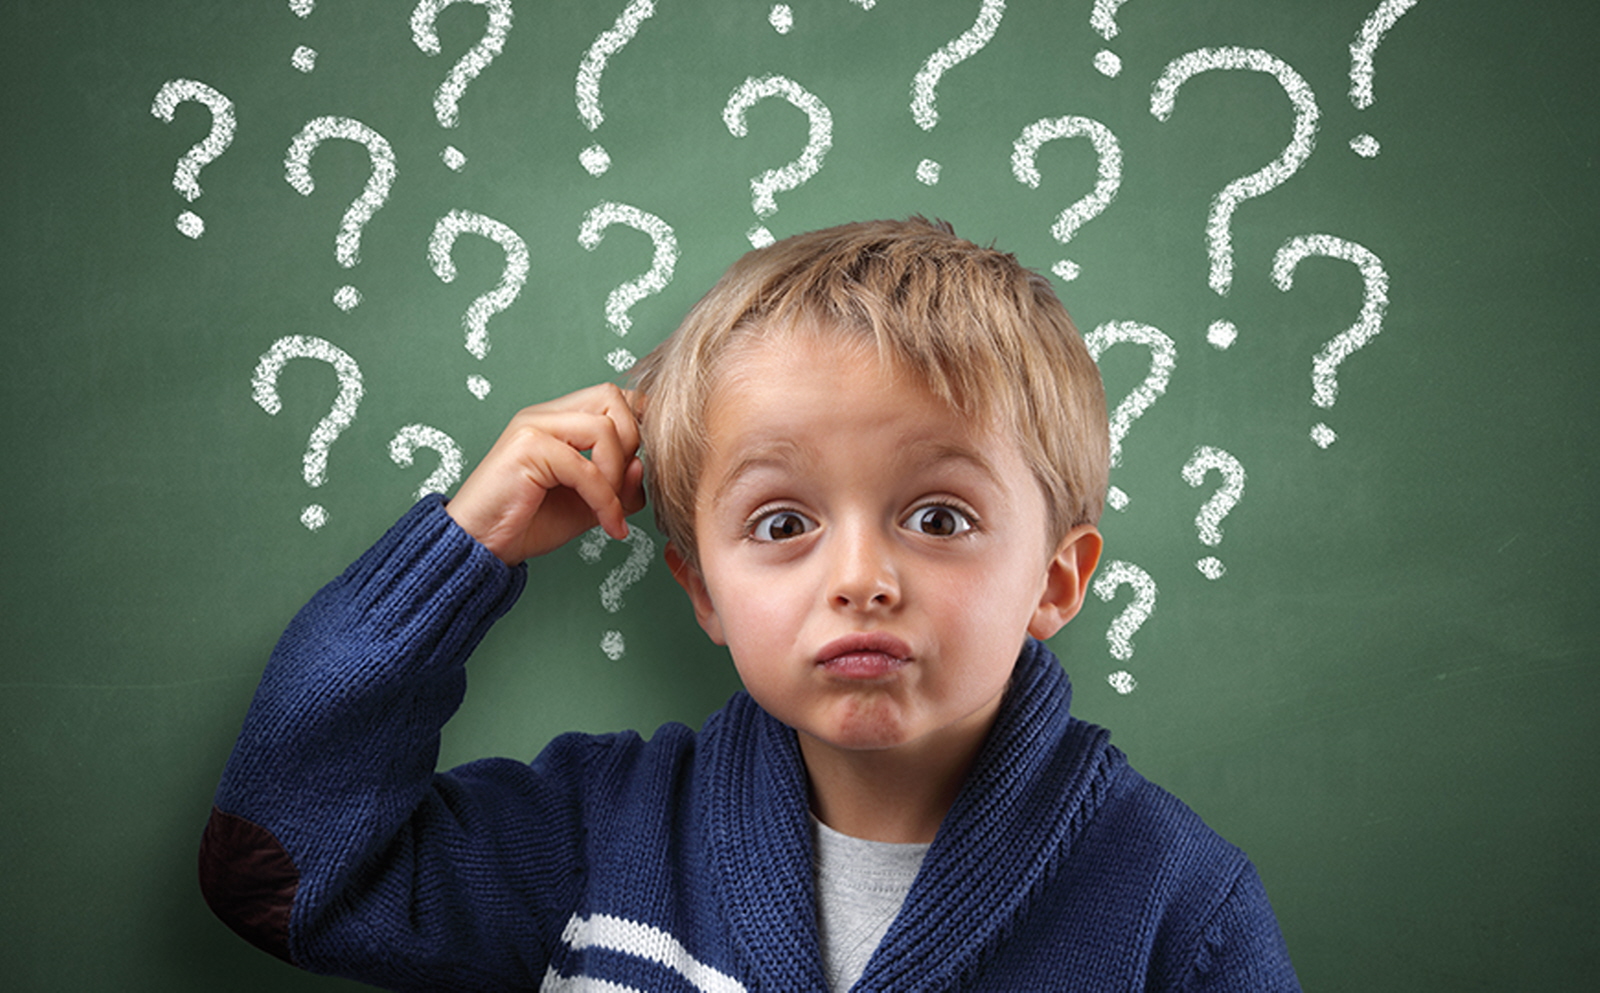 This Grammar Quiz May Seem Simple, But How Well Can You Score? Confused Confusion Child